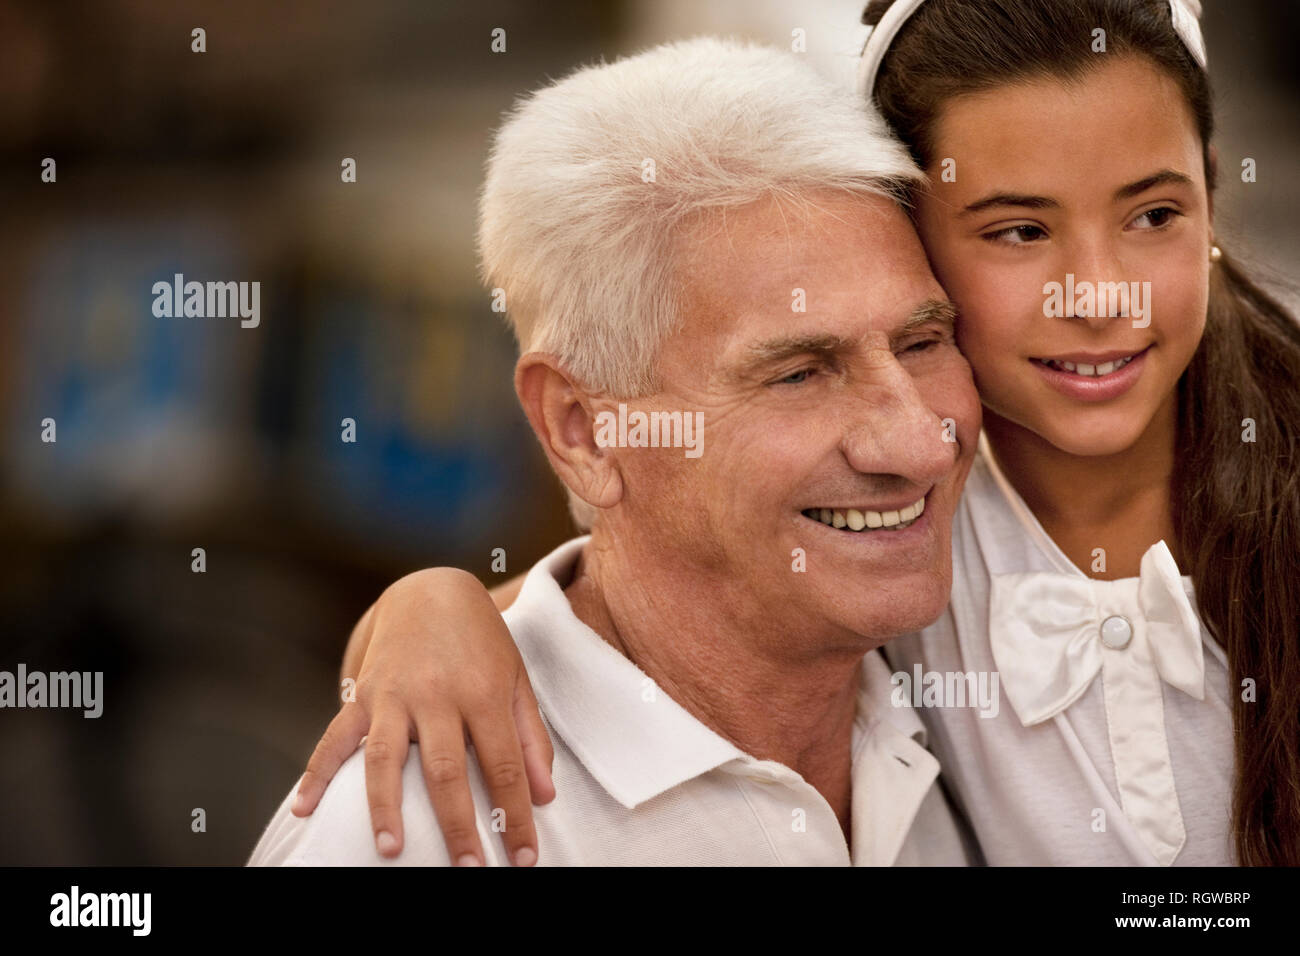 Young girl hugging her father. Stock Photo